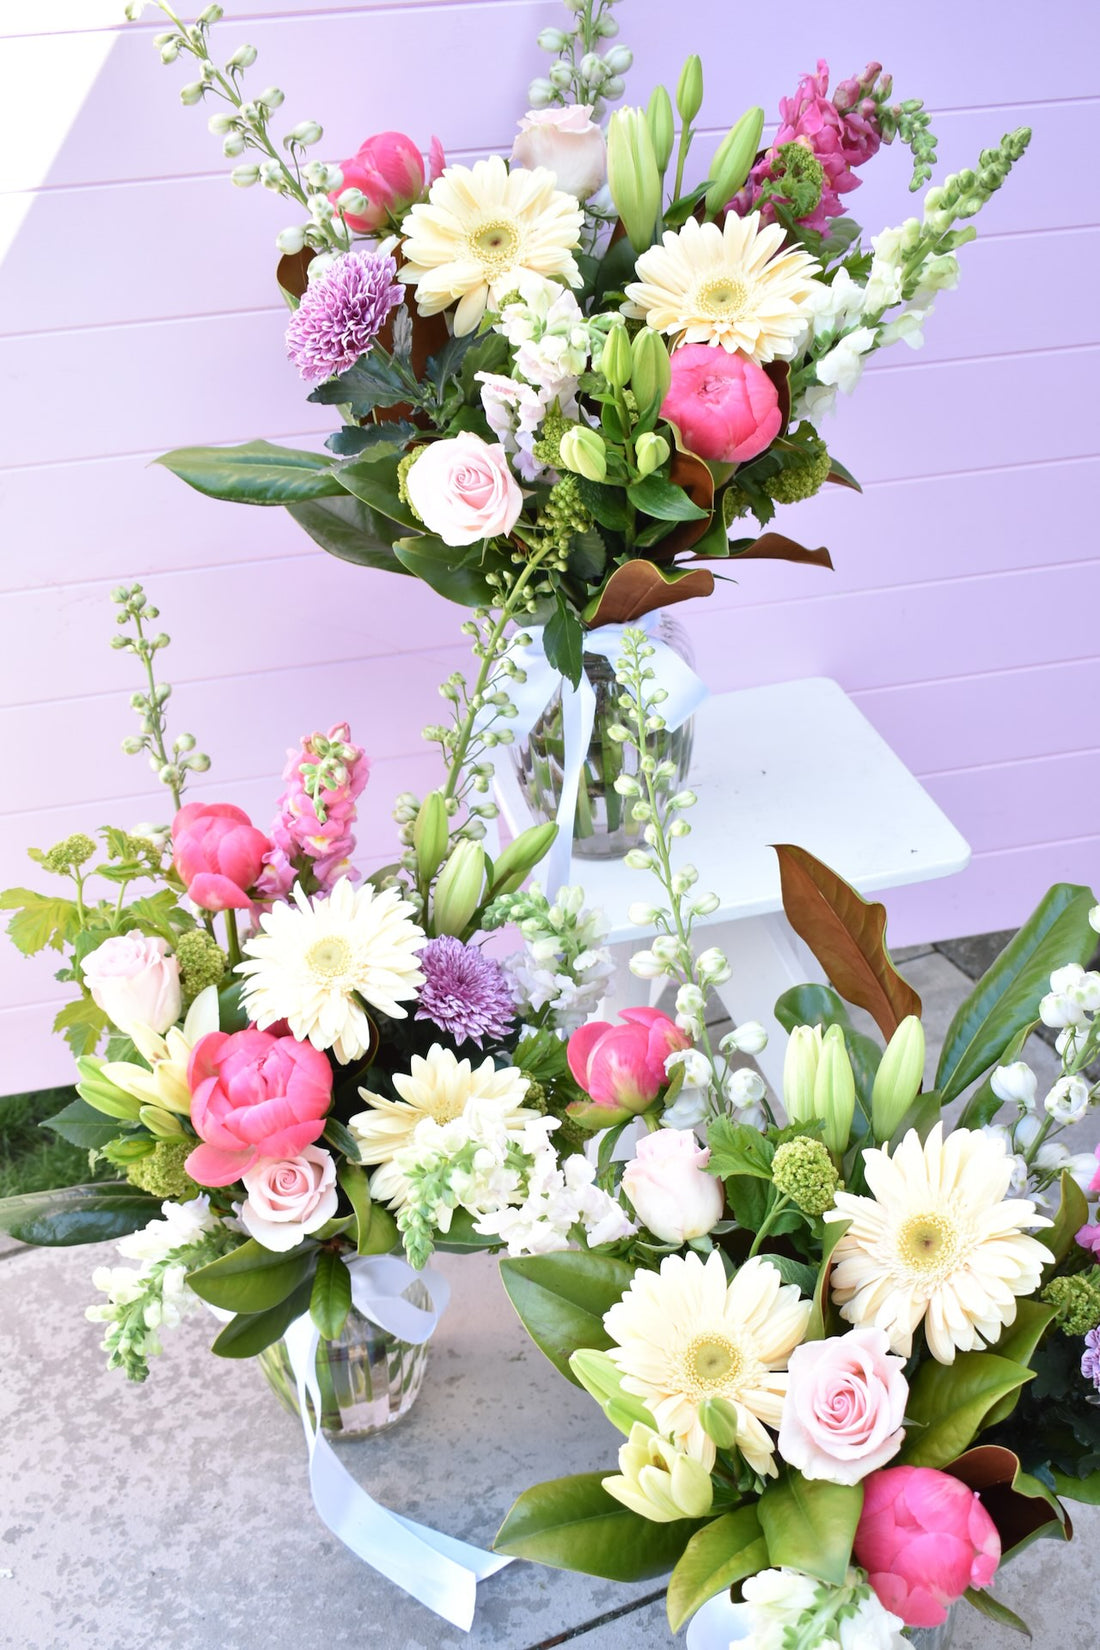 A pink background with two vases of white flowers sitting in front of. One vase sitting on white stool. Pretty flower bouquet in glass vase in colours of pink, peach, purple, white and green. Including peonies and roses